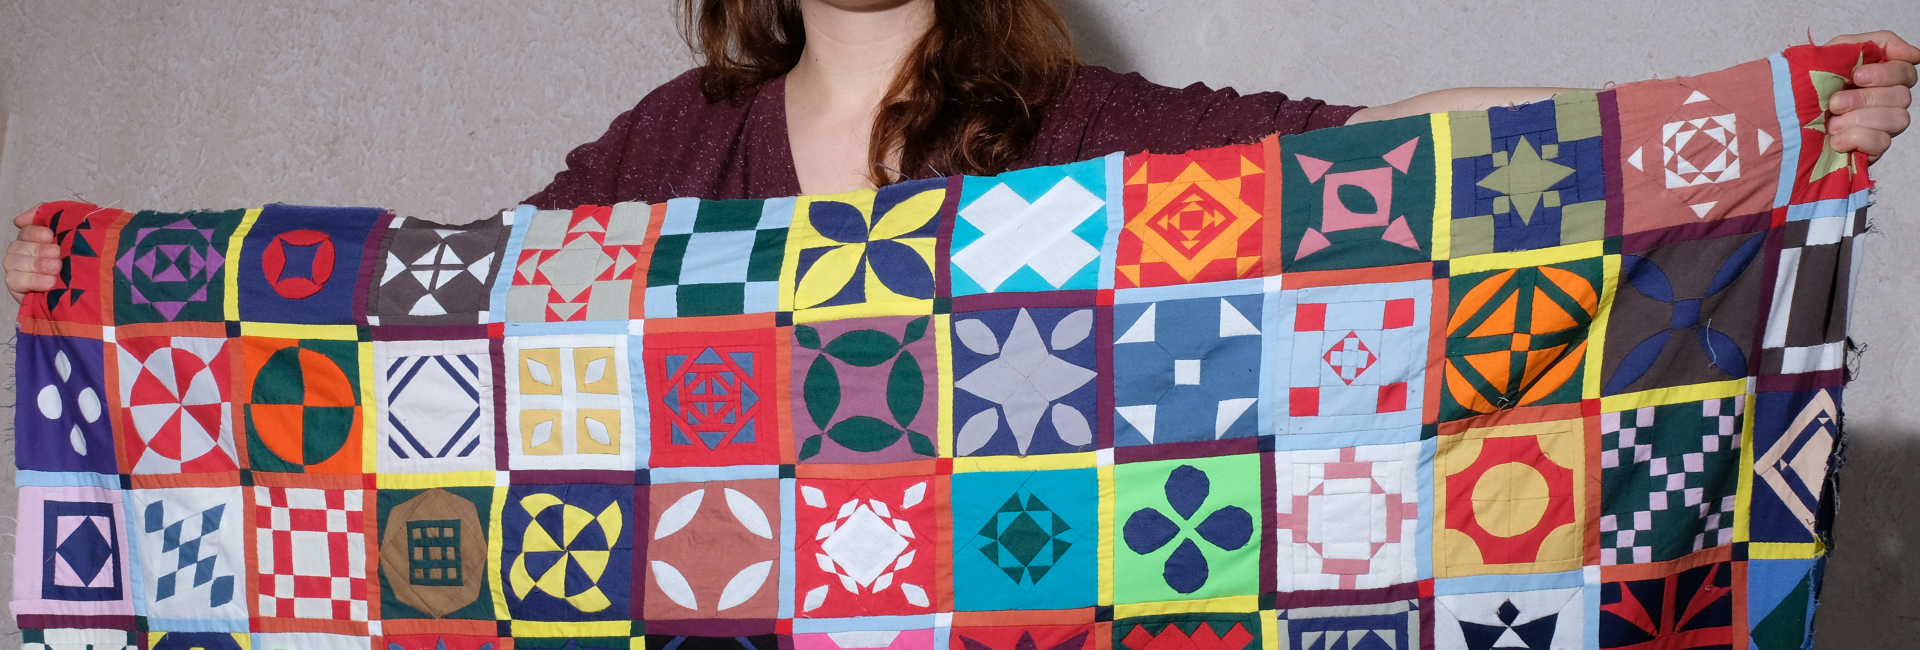 Rianne of Kick Ass Quilts holding Dear Jane Quilt Sampler made from all the colours in solid fabrics looking determined